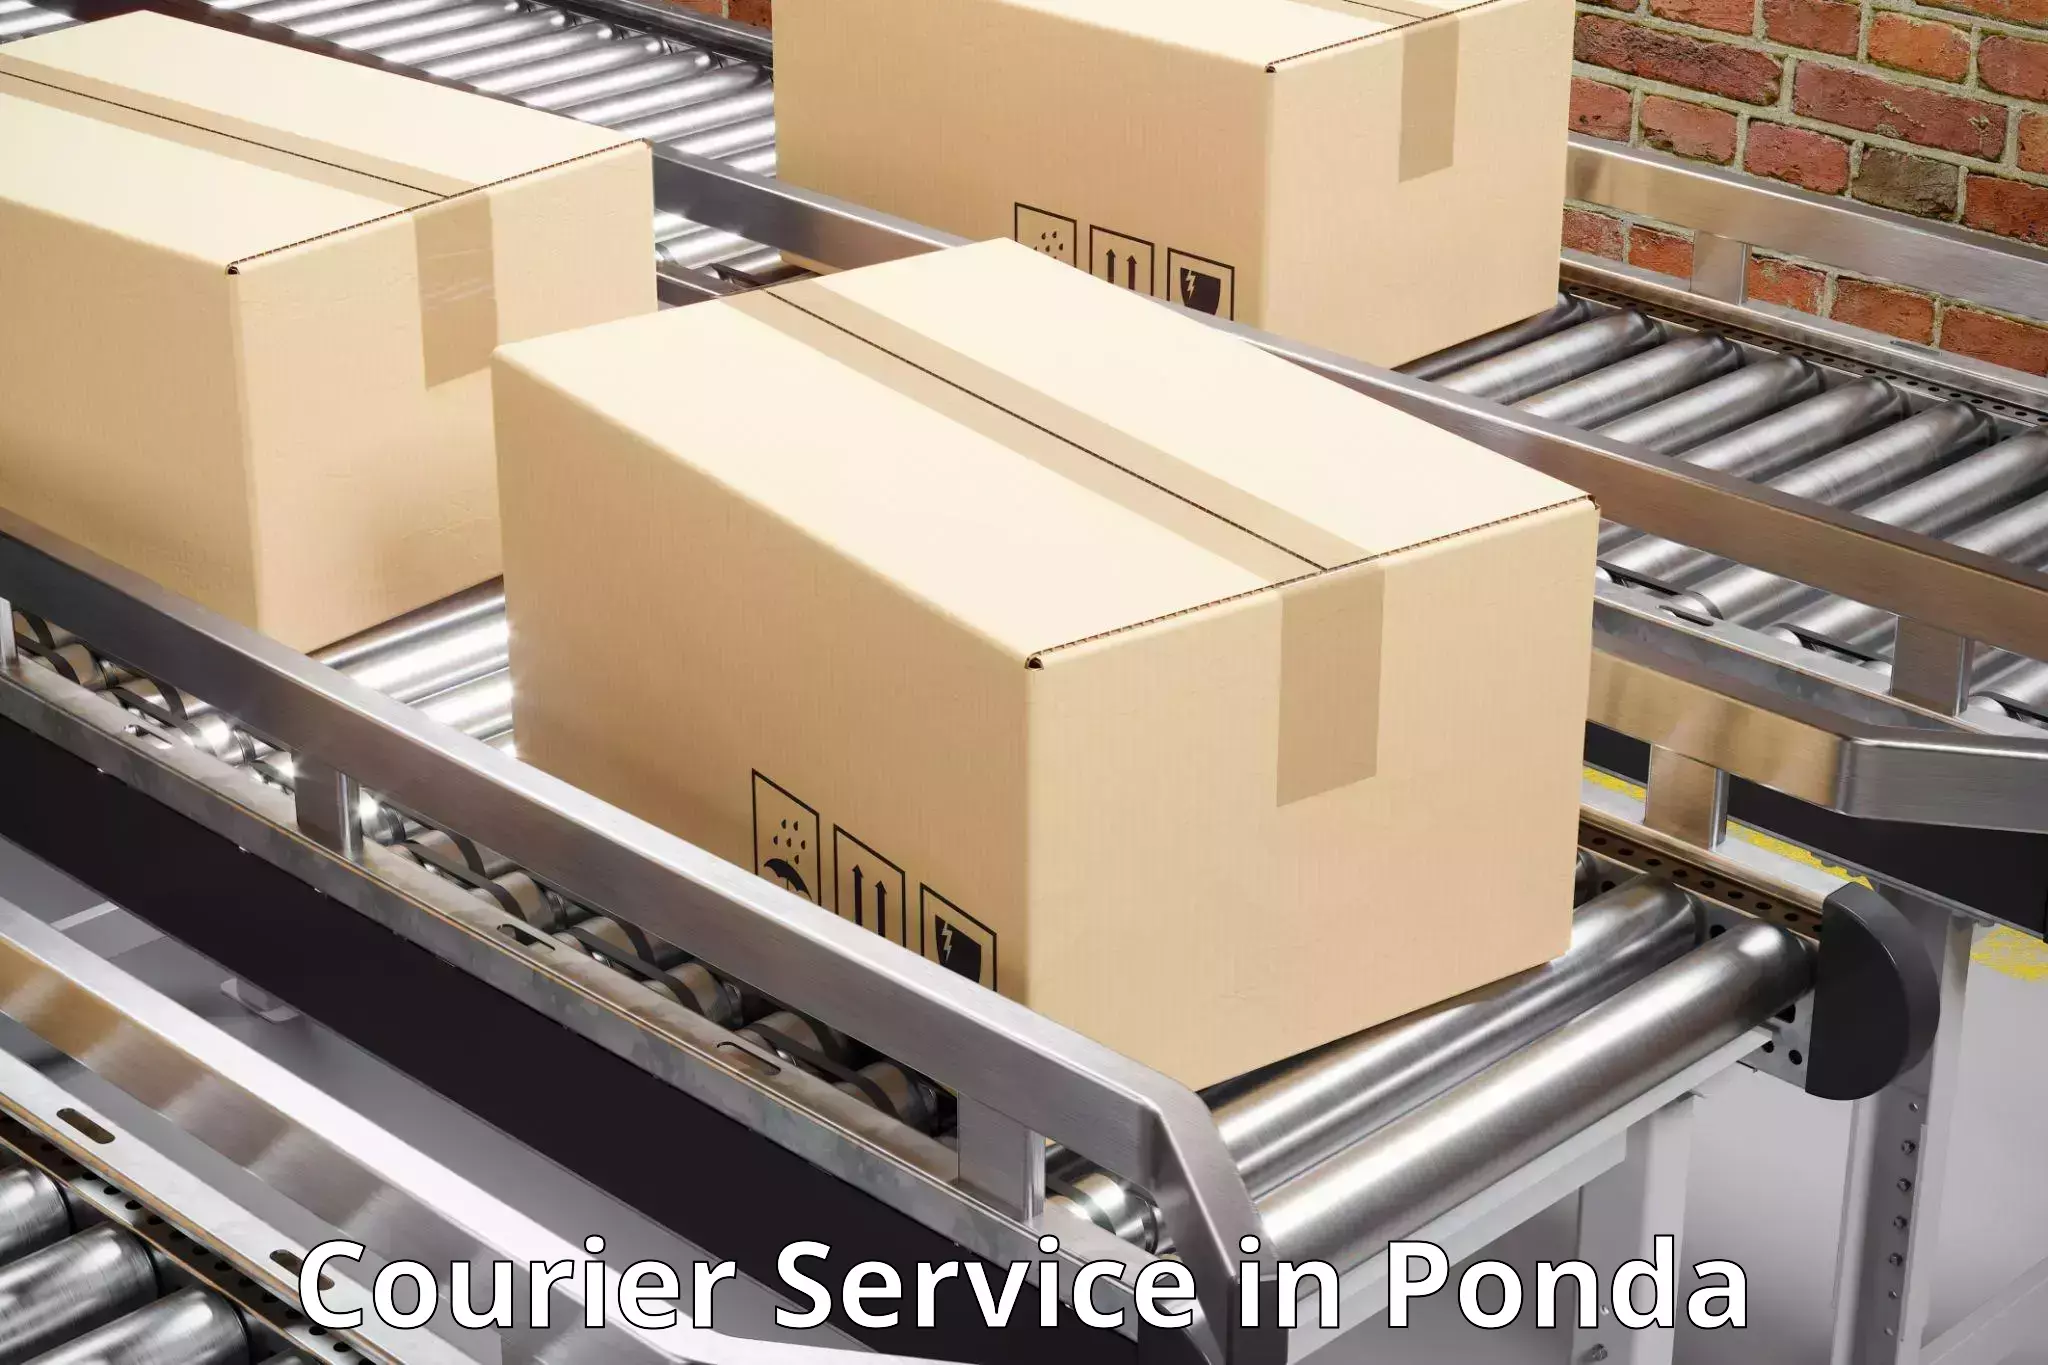 24-hour courier service in Ponda